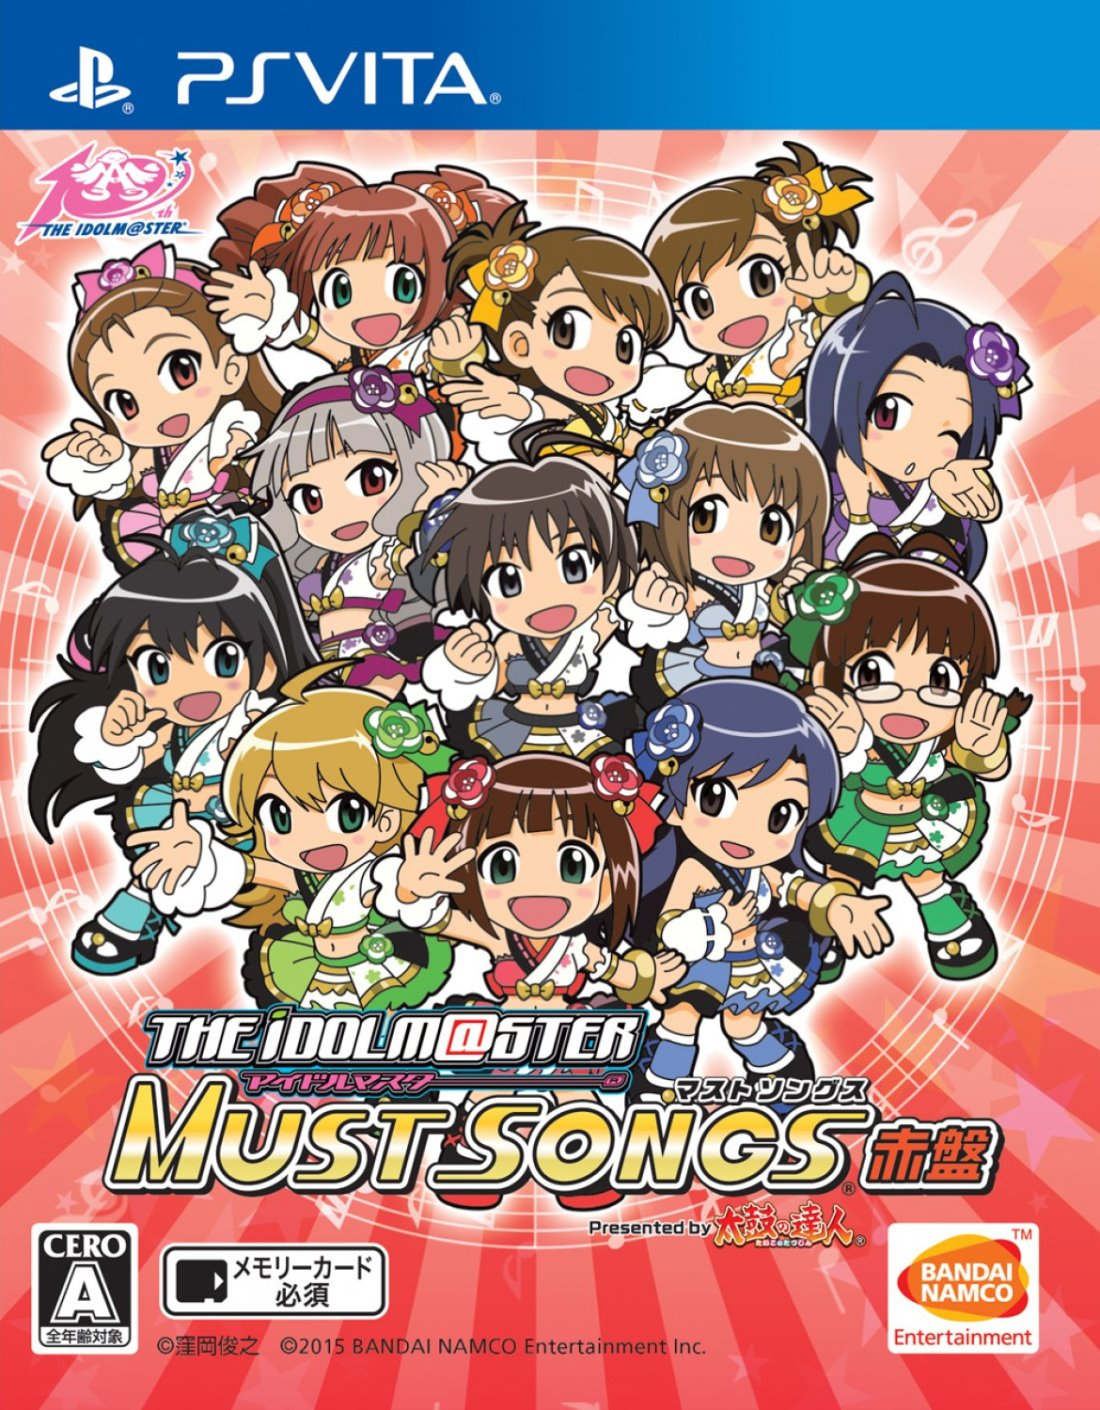 THE IDOLM@STER MUST SONGS | THE IDOLM@STER Wiki | Fandom